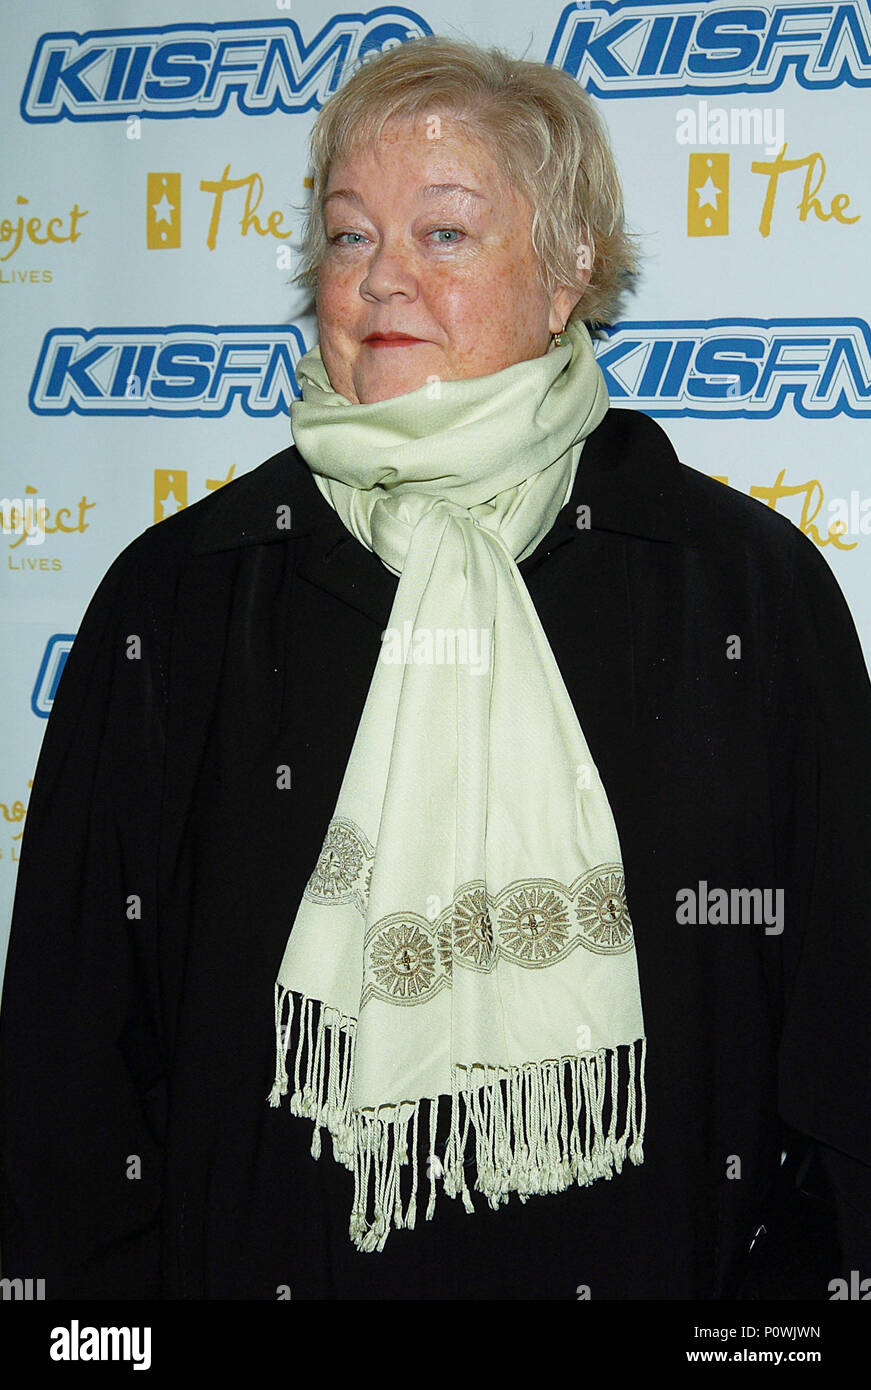 Kathy Kinney (Drew Carrey Show) arriving at the Trevor Project's Cracked Xmas 7 at the Wiltern Theatre in Los Angeles. December 5, 2004.32KinneyKathy DrewCarrey011 Red Carpet Event, Vertical, USA, Film Industry, Celebrities,  Photography, Bestof, Arts Culture and Entertainment, Topix Celebrities fashion /  Vertical, Best of, Event in Hollywood Life - California,  Red Carpet and backstage, USA, Film Industry, Celebrities,  movie celebrities, TV celebrities, Music celebrities, Photography, Bestof, Arts Culture and Entertainment,  Topix, vertical, one person,, from the years , 2003 to 2005, inqui Stock Photo